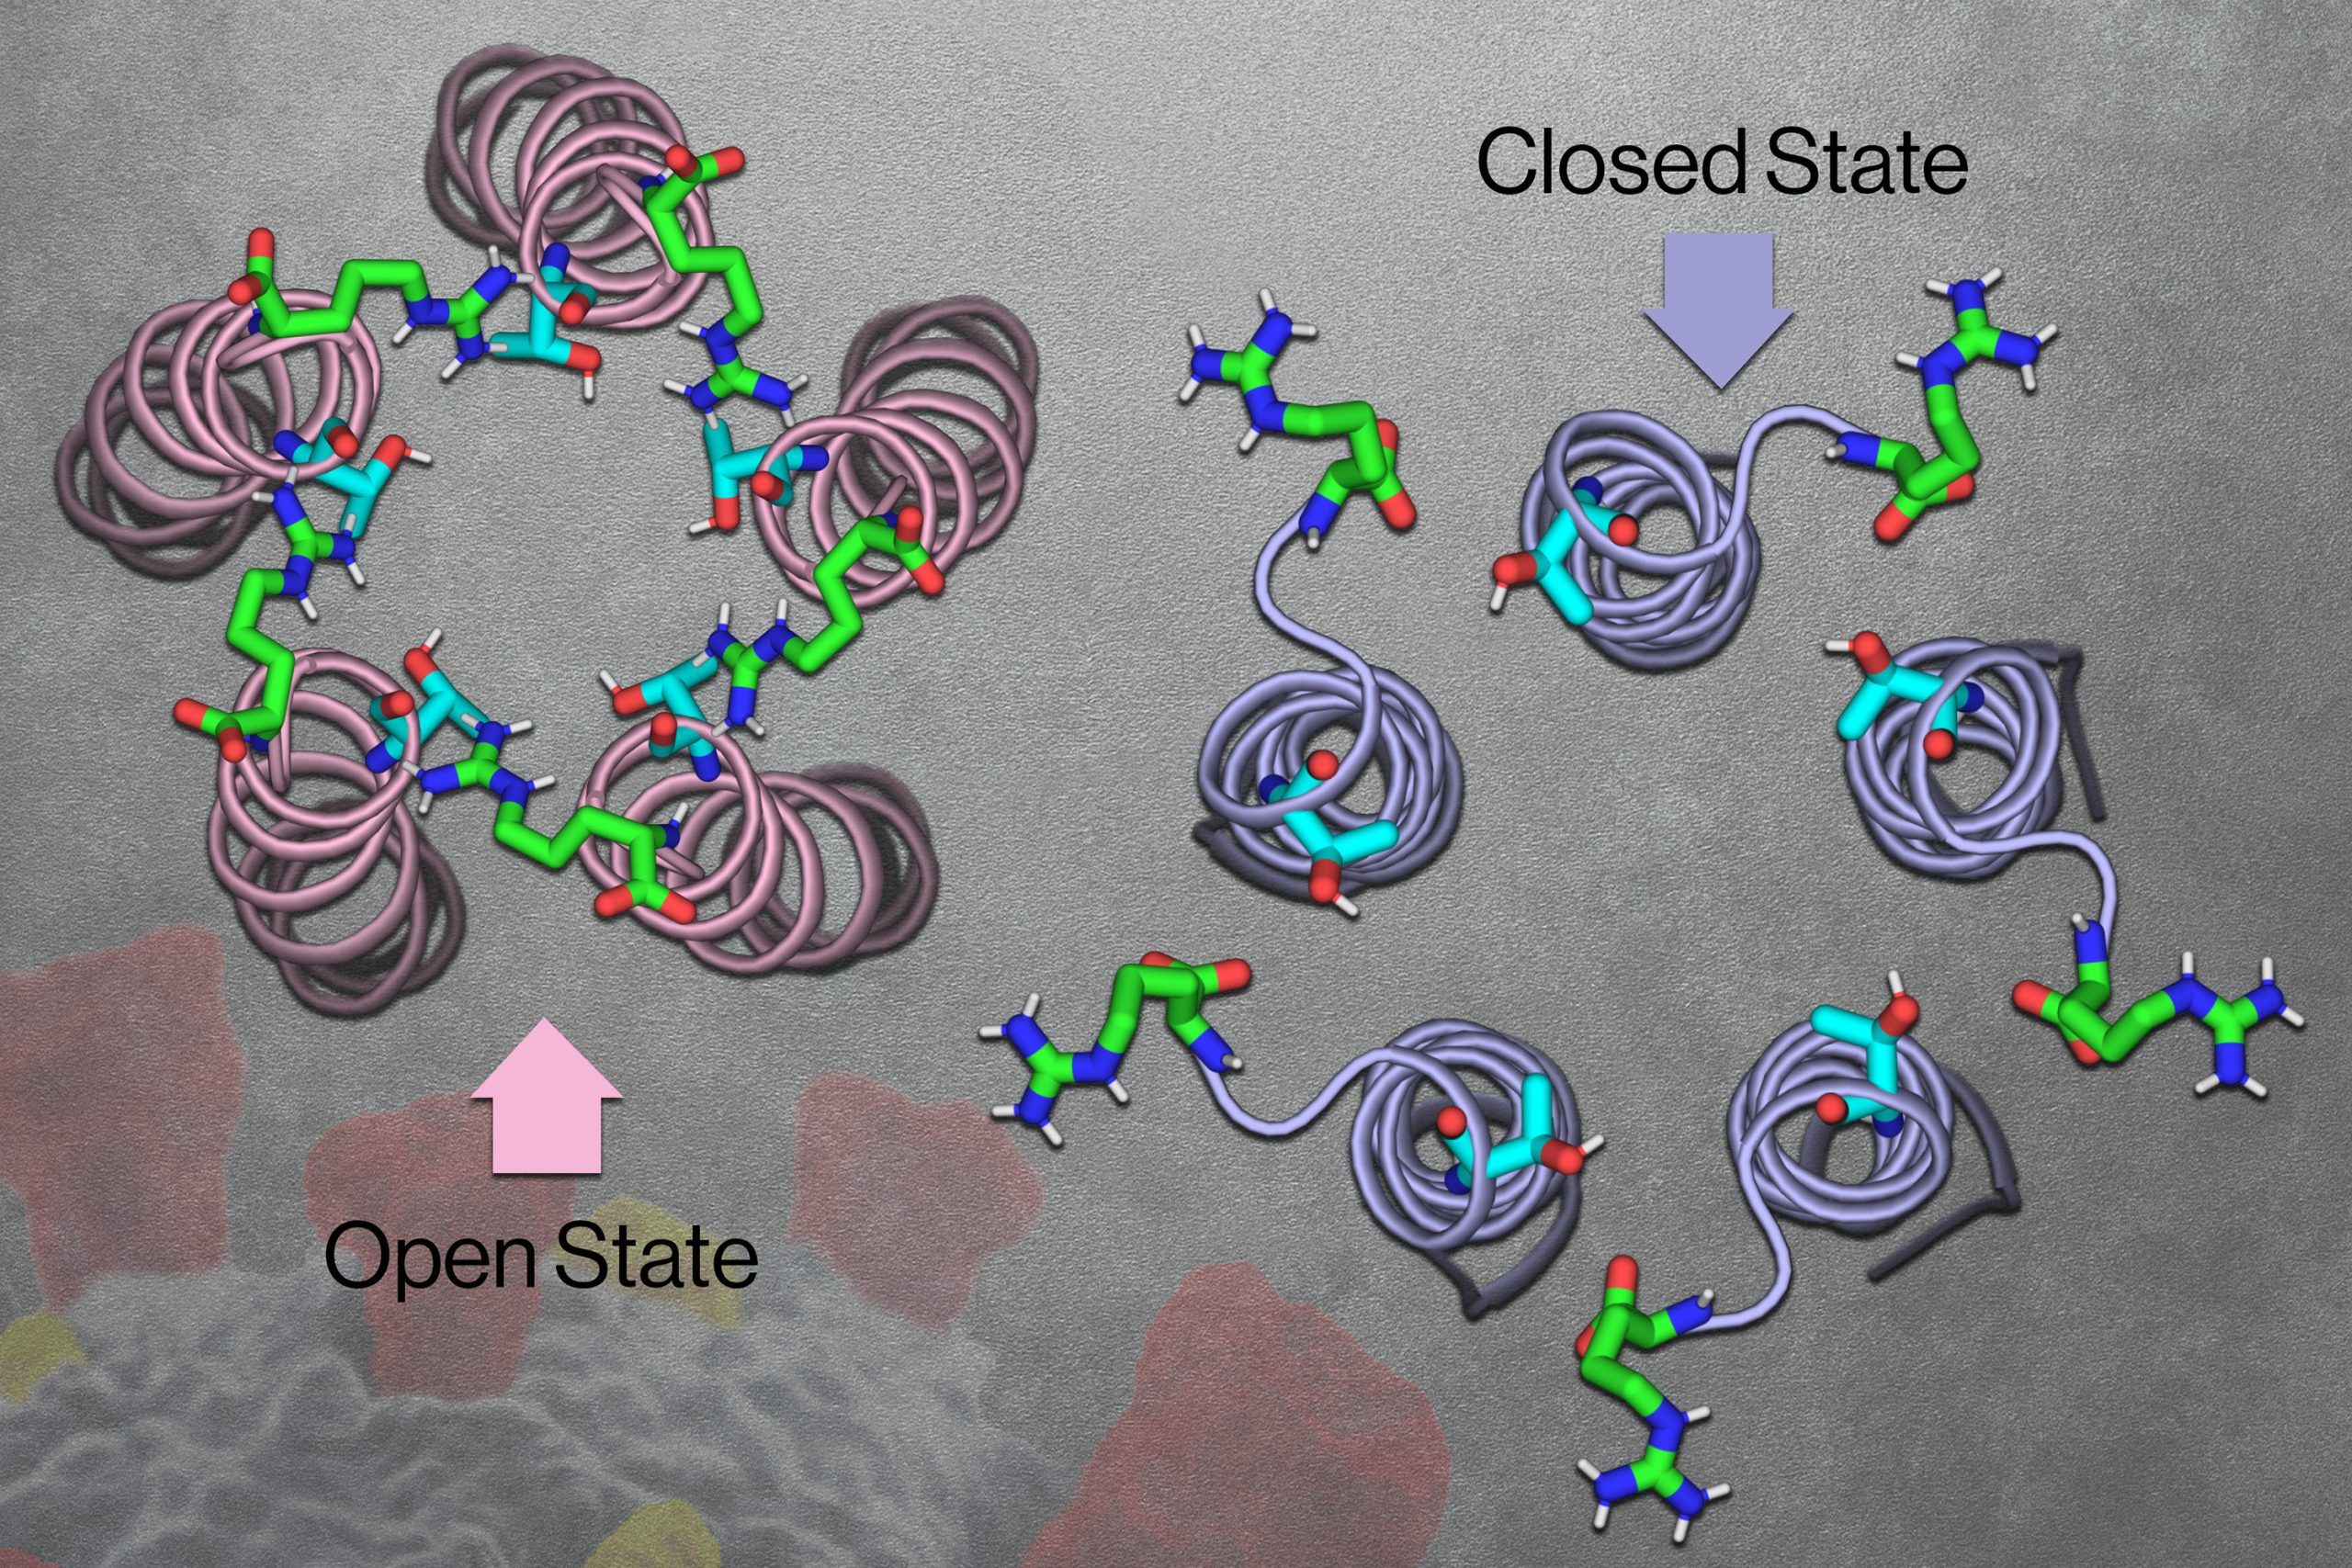 On left, labeled “Open State,” are noodle-like E proteins tightly bundled together in a helix shape, with amino acids close by. On right, labeled “Closed State,” the E protein are bundled more loosely, with amino acids connected further away